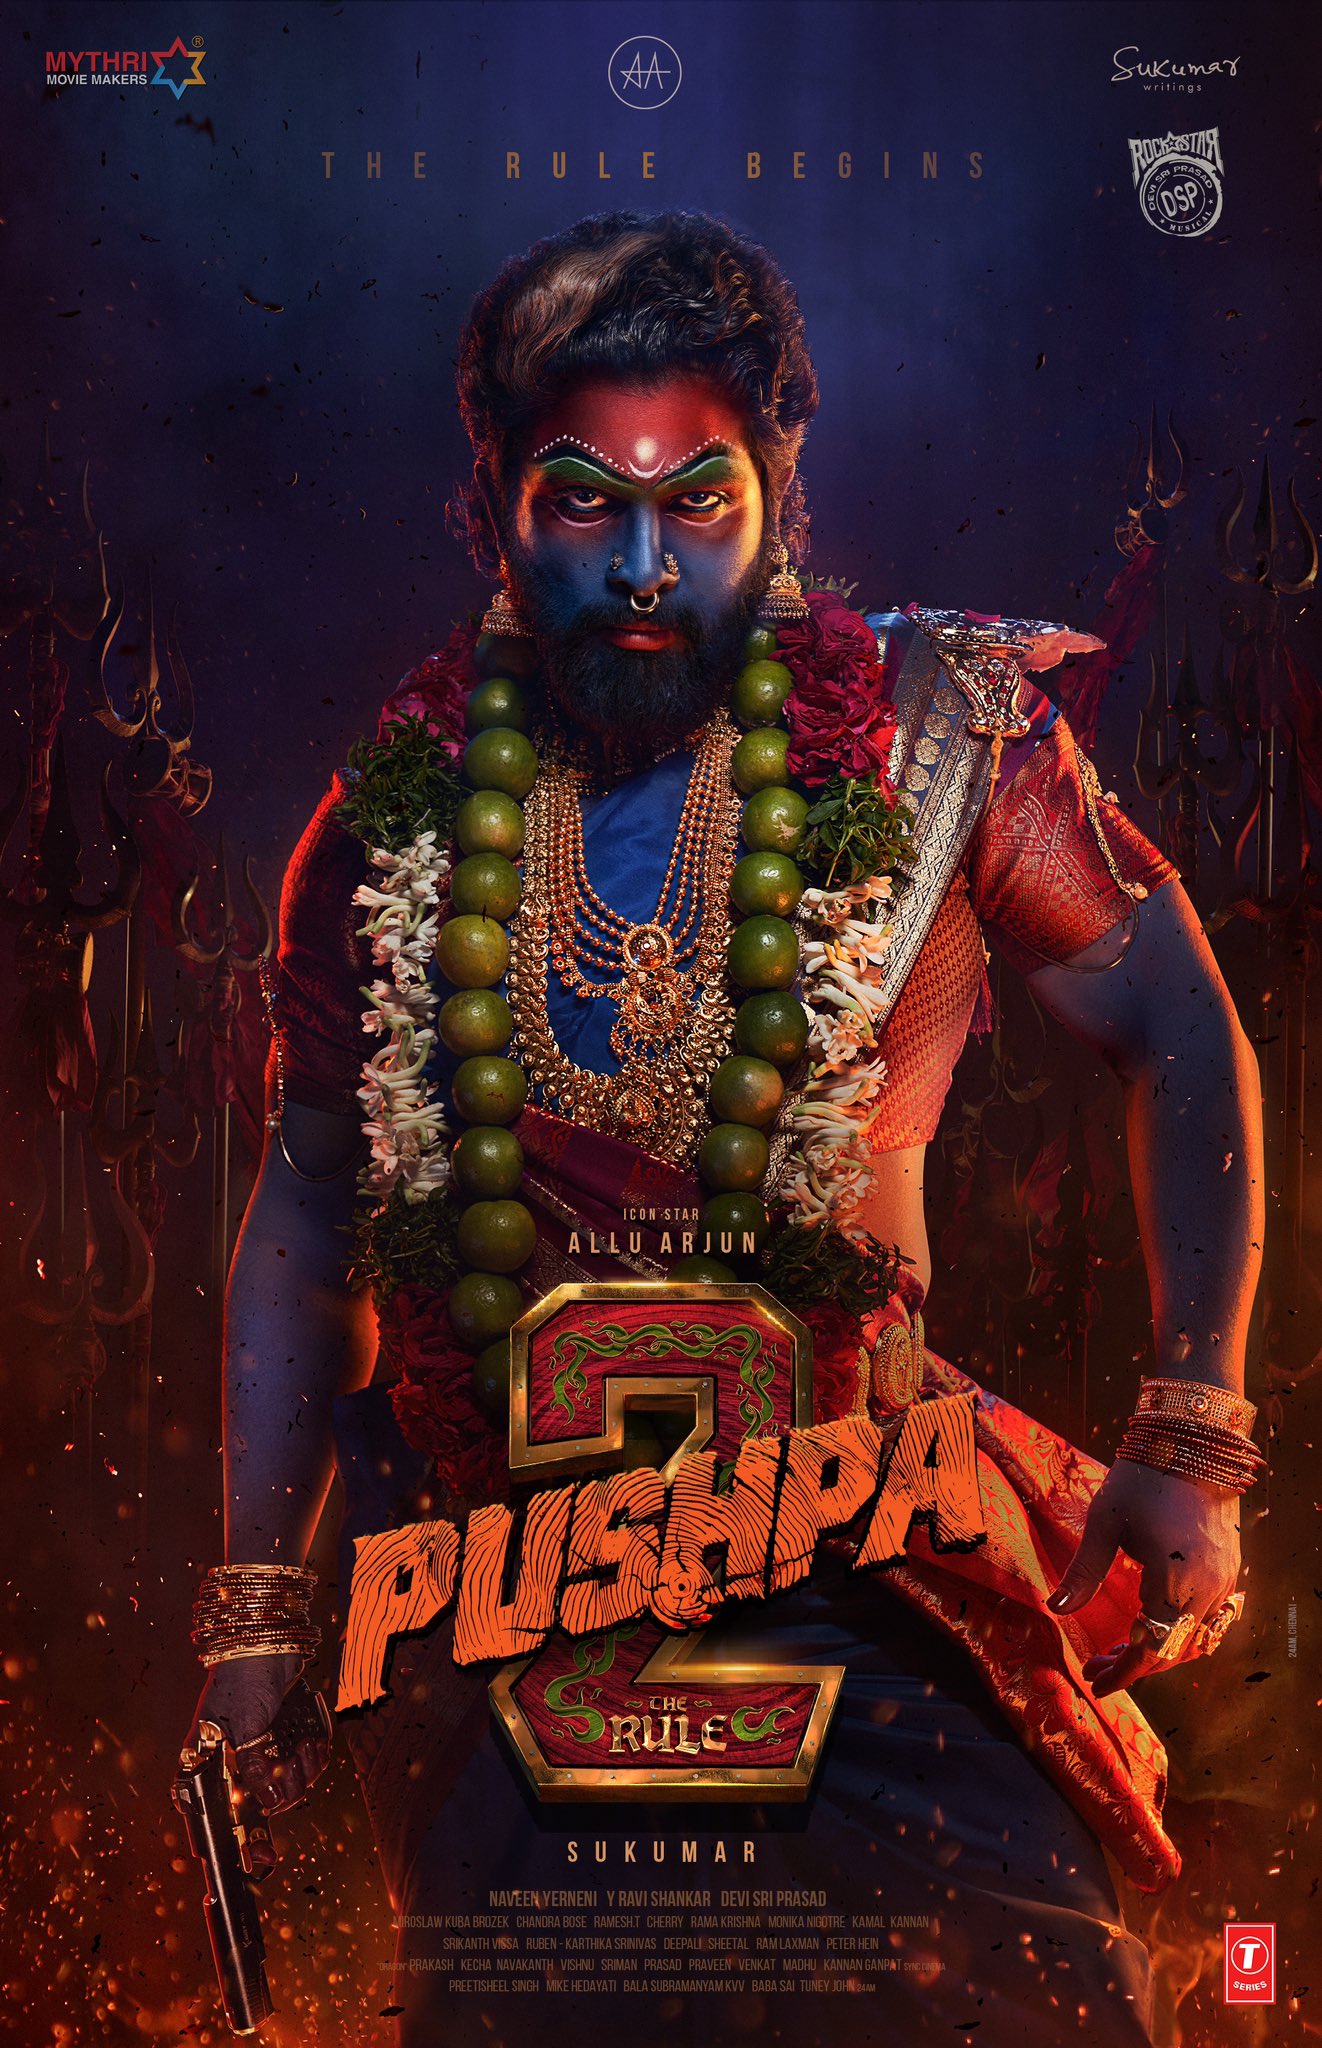 Pushpa2 Movie May Not Come In Time